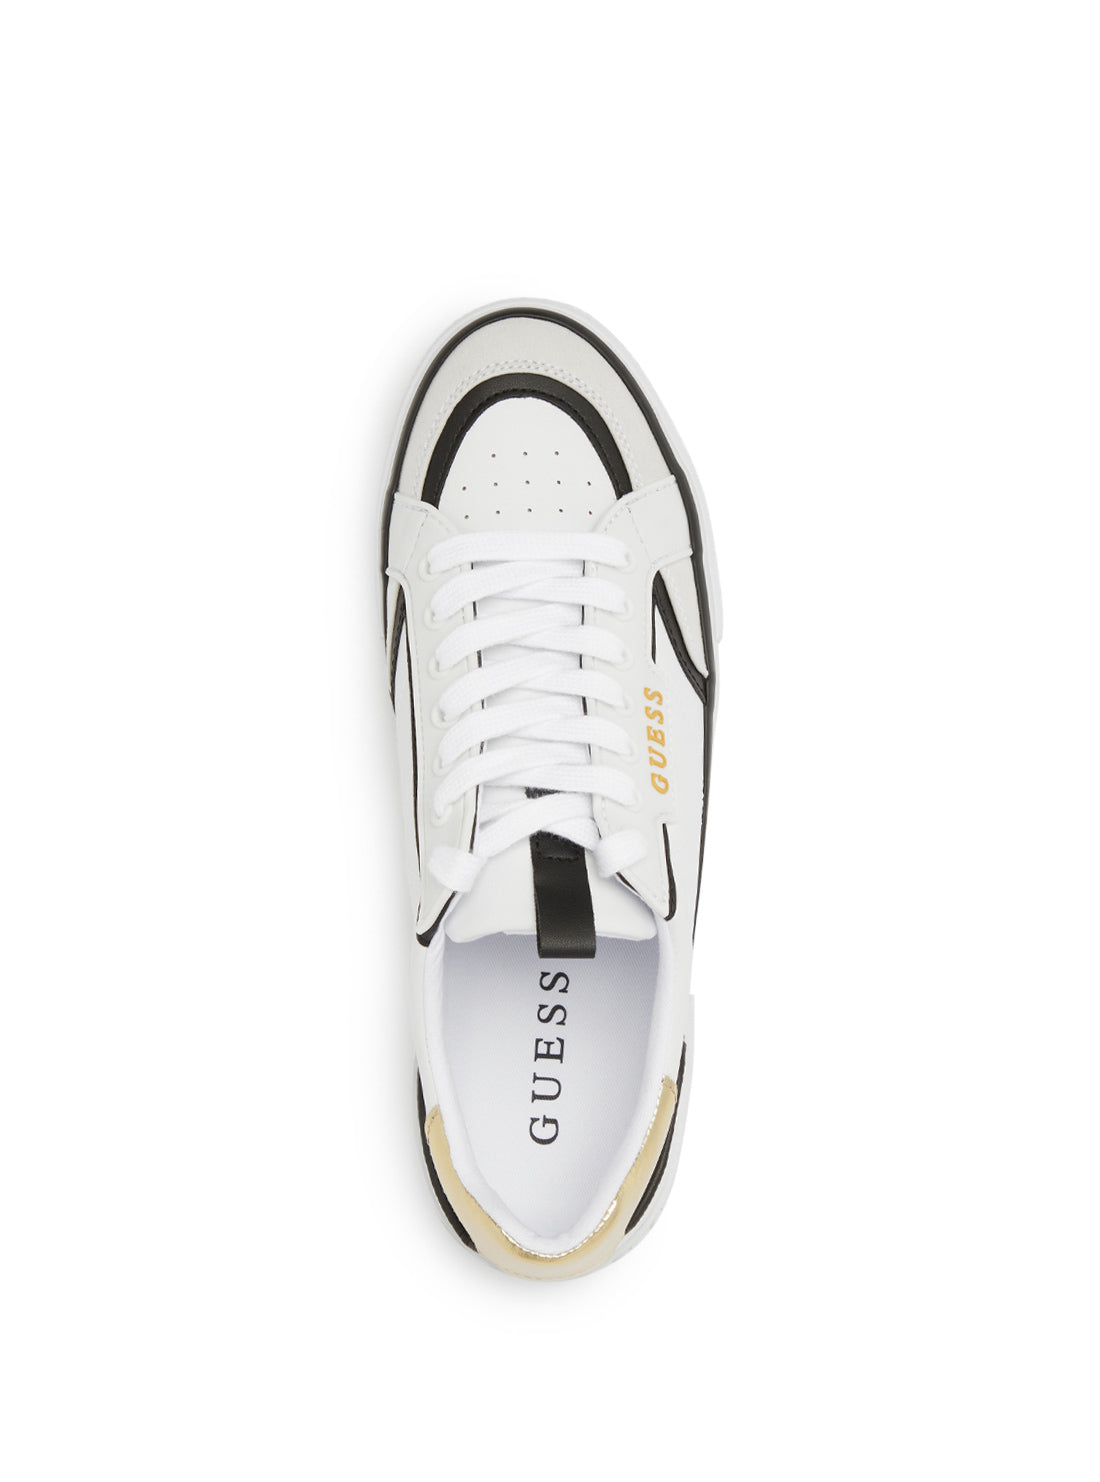 GUESS Women's White Gold Lollin Low Top Sneakers LOLLIN-A WHI03 Top View